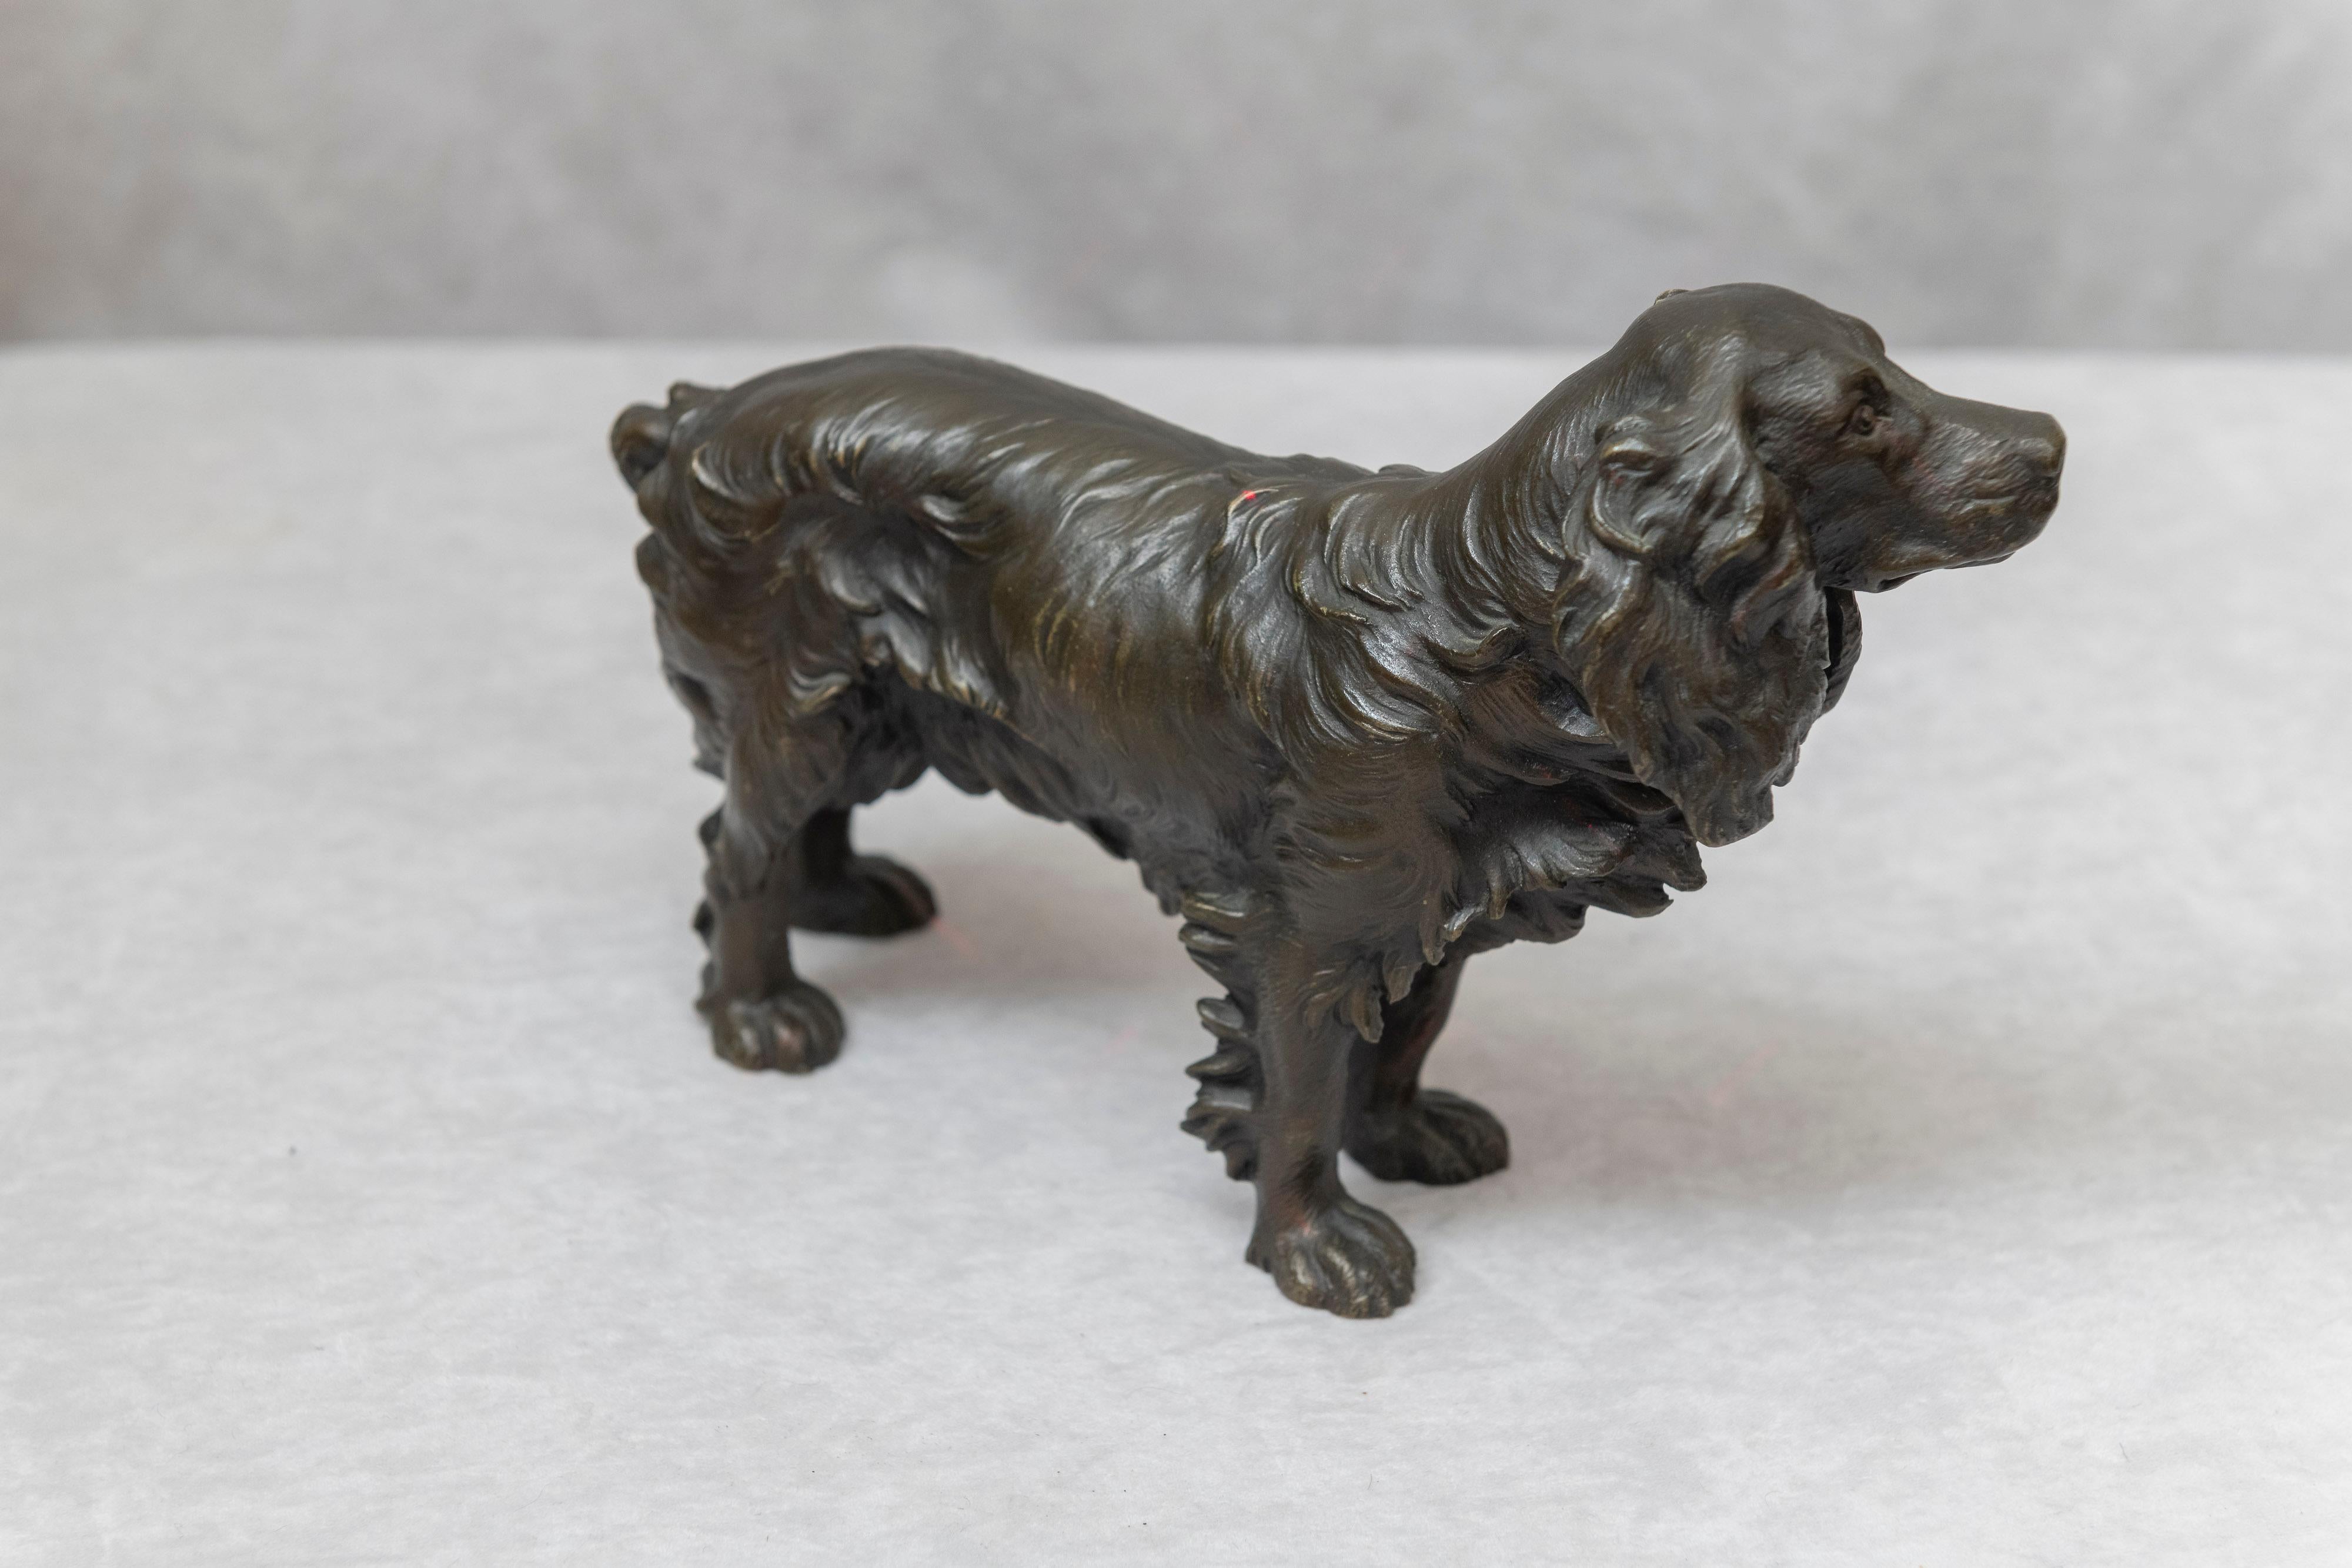 We have been selling Vienna bronzes for over 40 years, and we can safely say that this bronze figure of a cocker spaniel is special. It's size , quality casting, and luscious patina are what makes this one a 